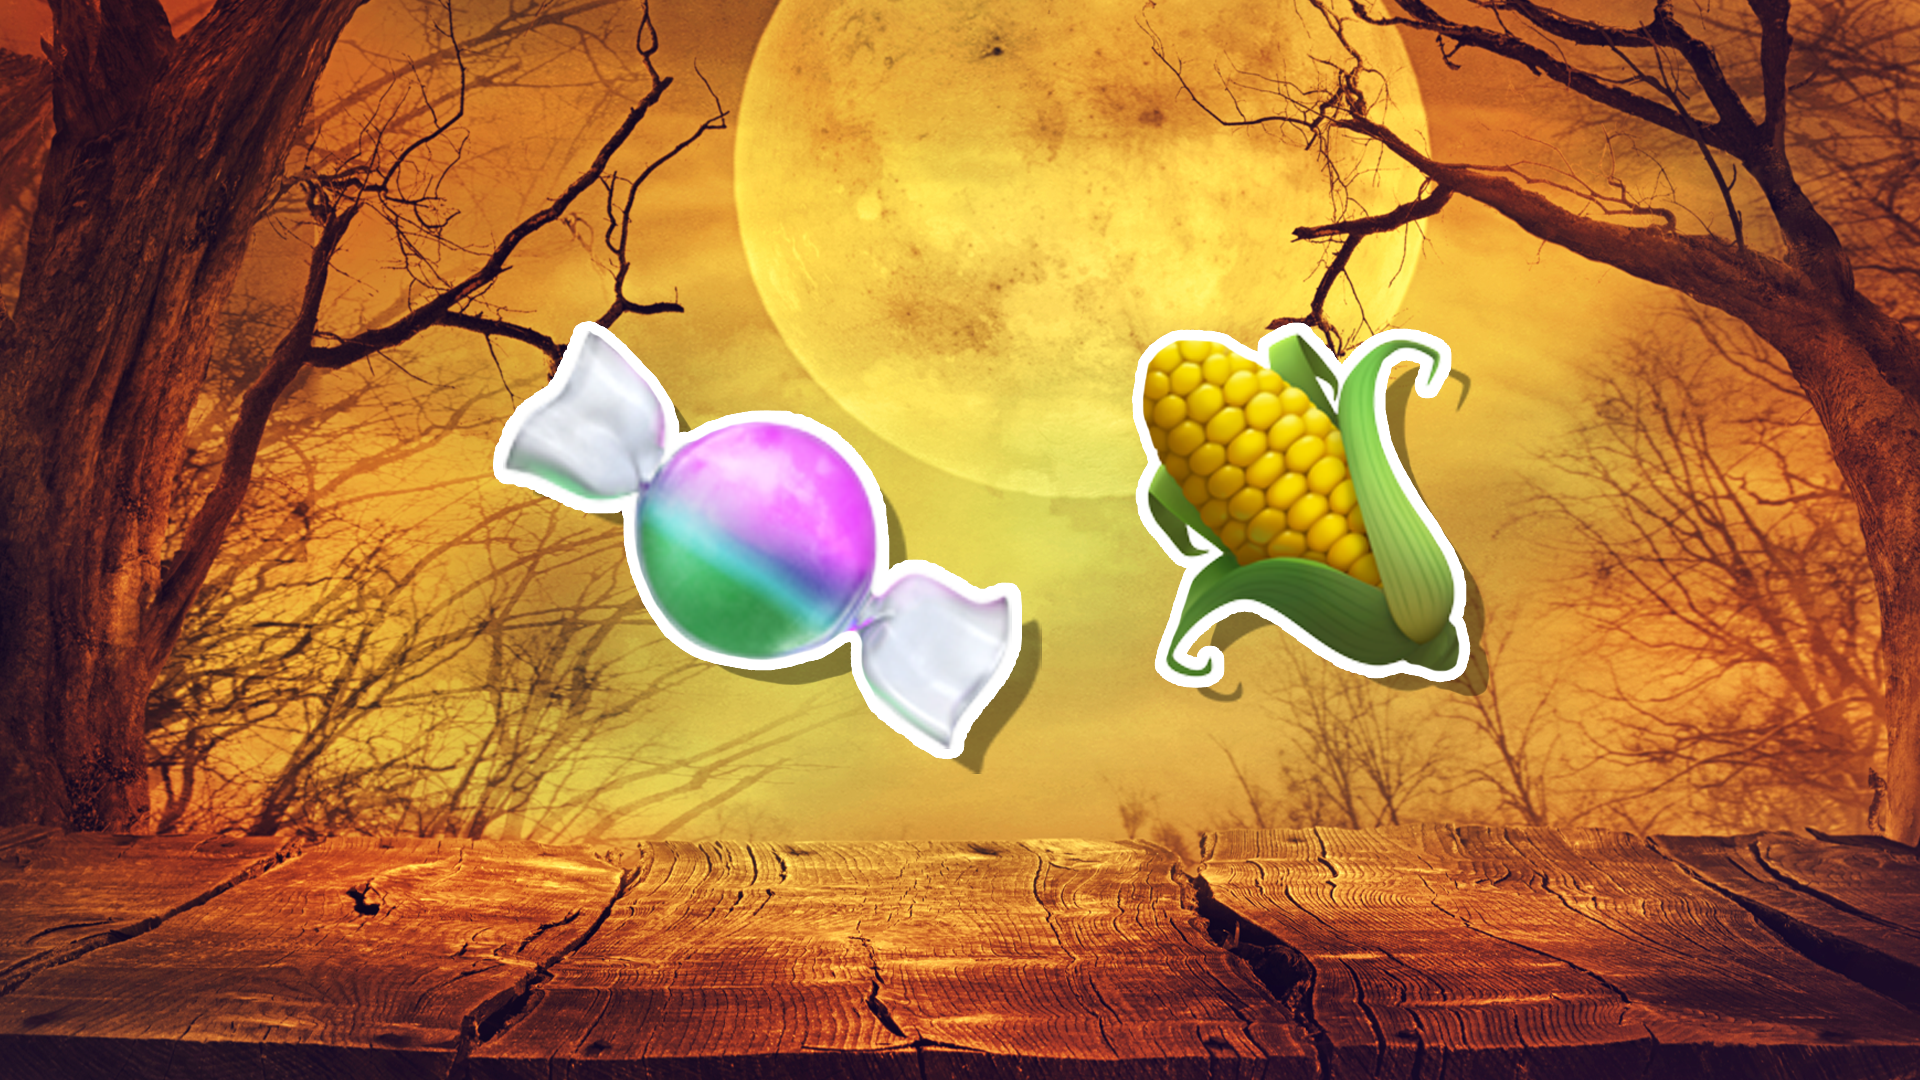 Halloween emoji featuring sweets and a vegetable